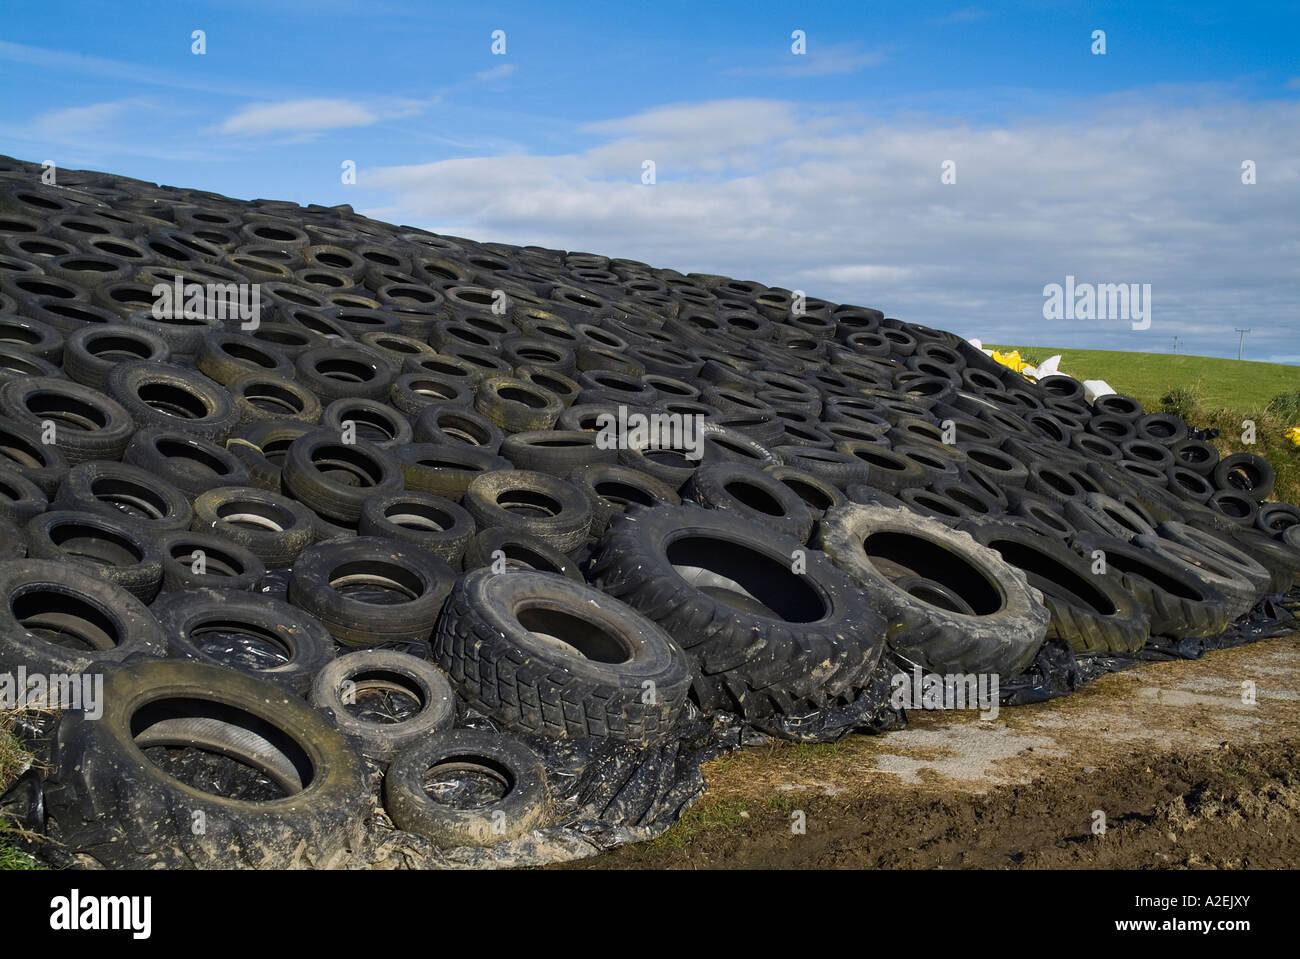 dh Silage pit SILAGE UK Tractor and car tyres weighing down covered black plastic covering on silage pit farming Stock Photo